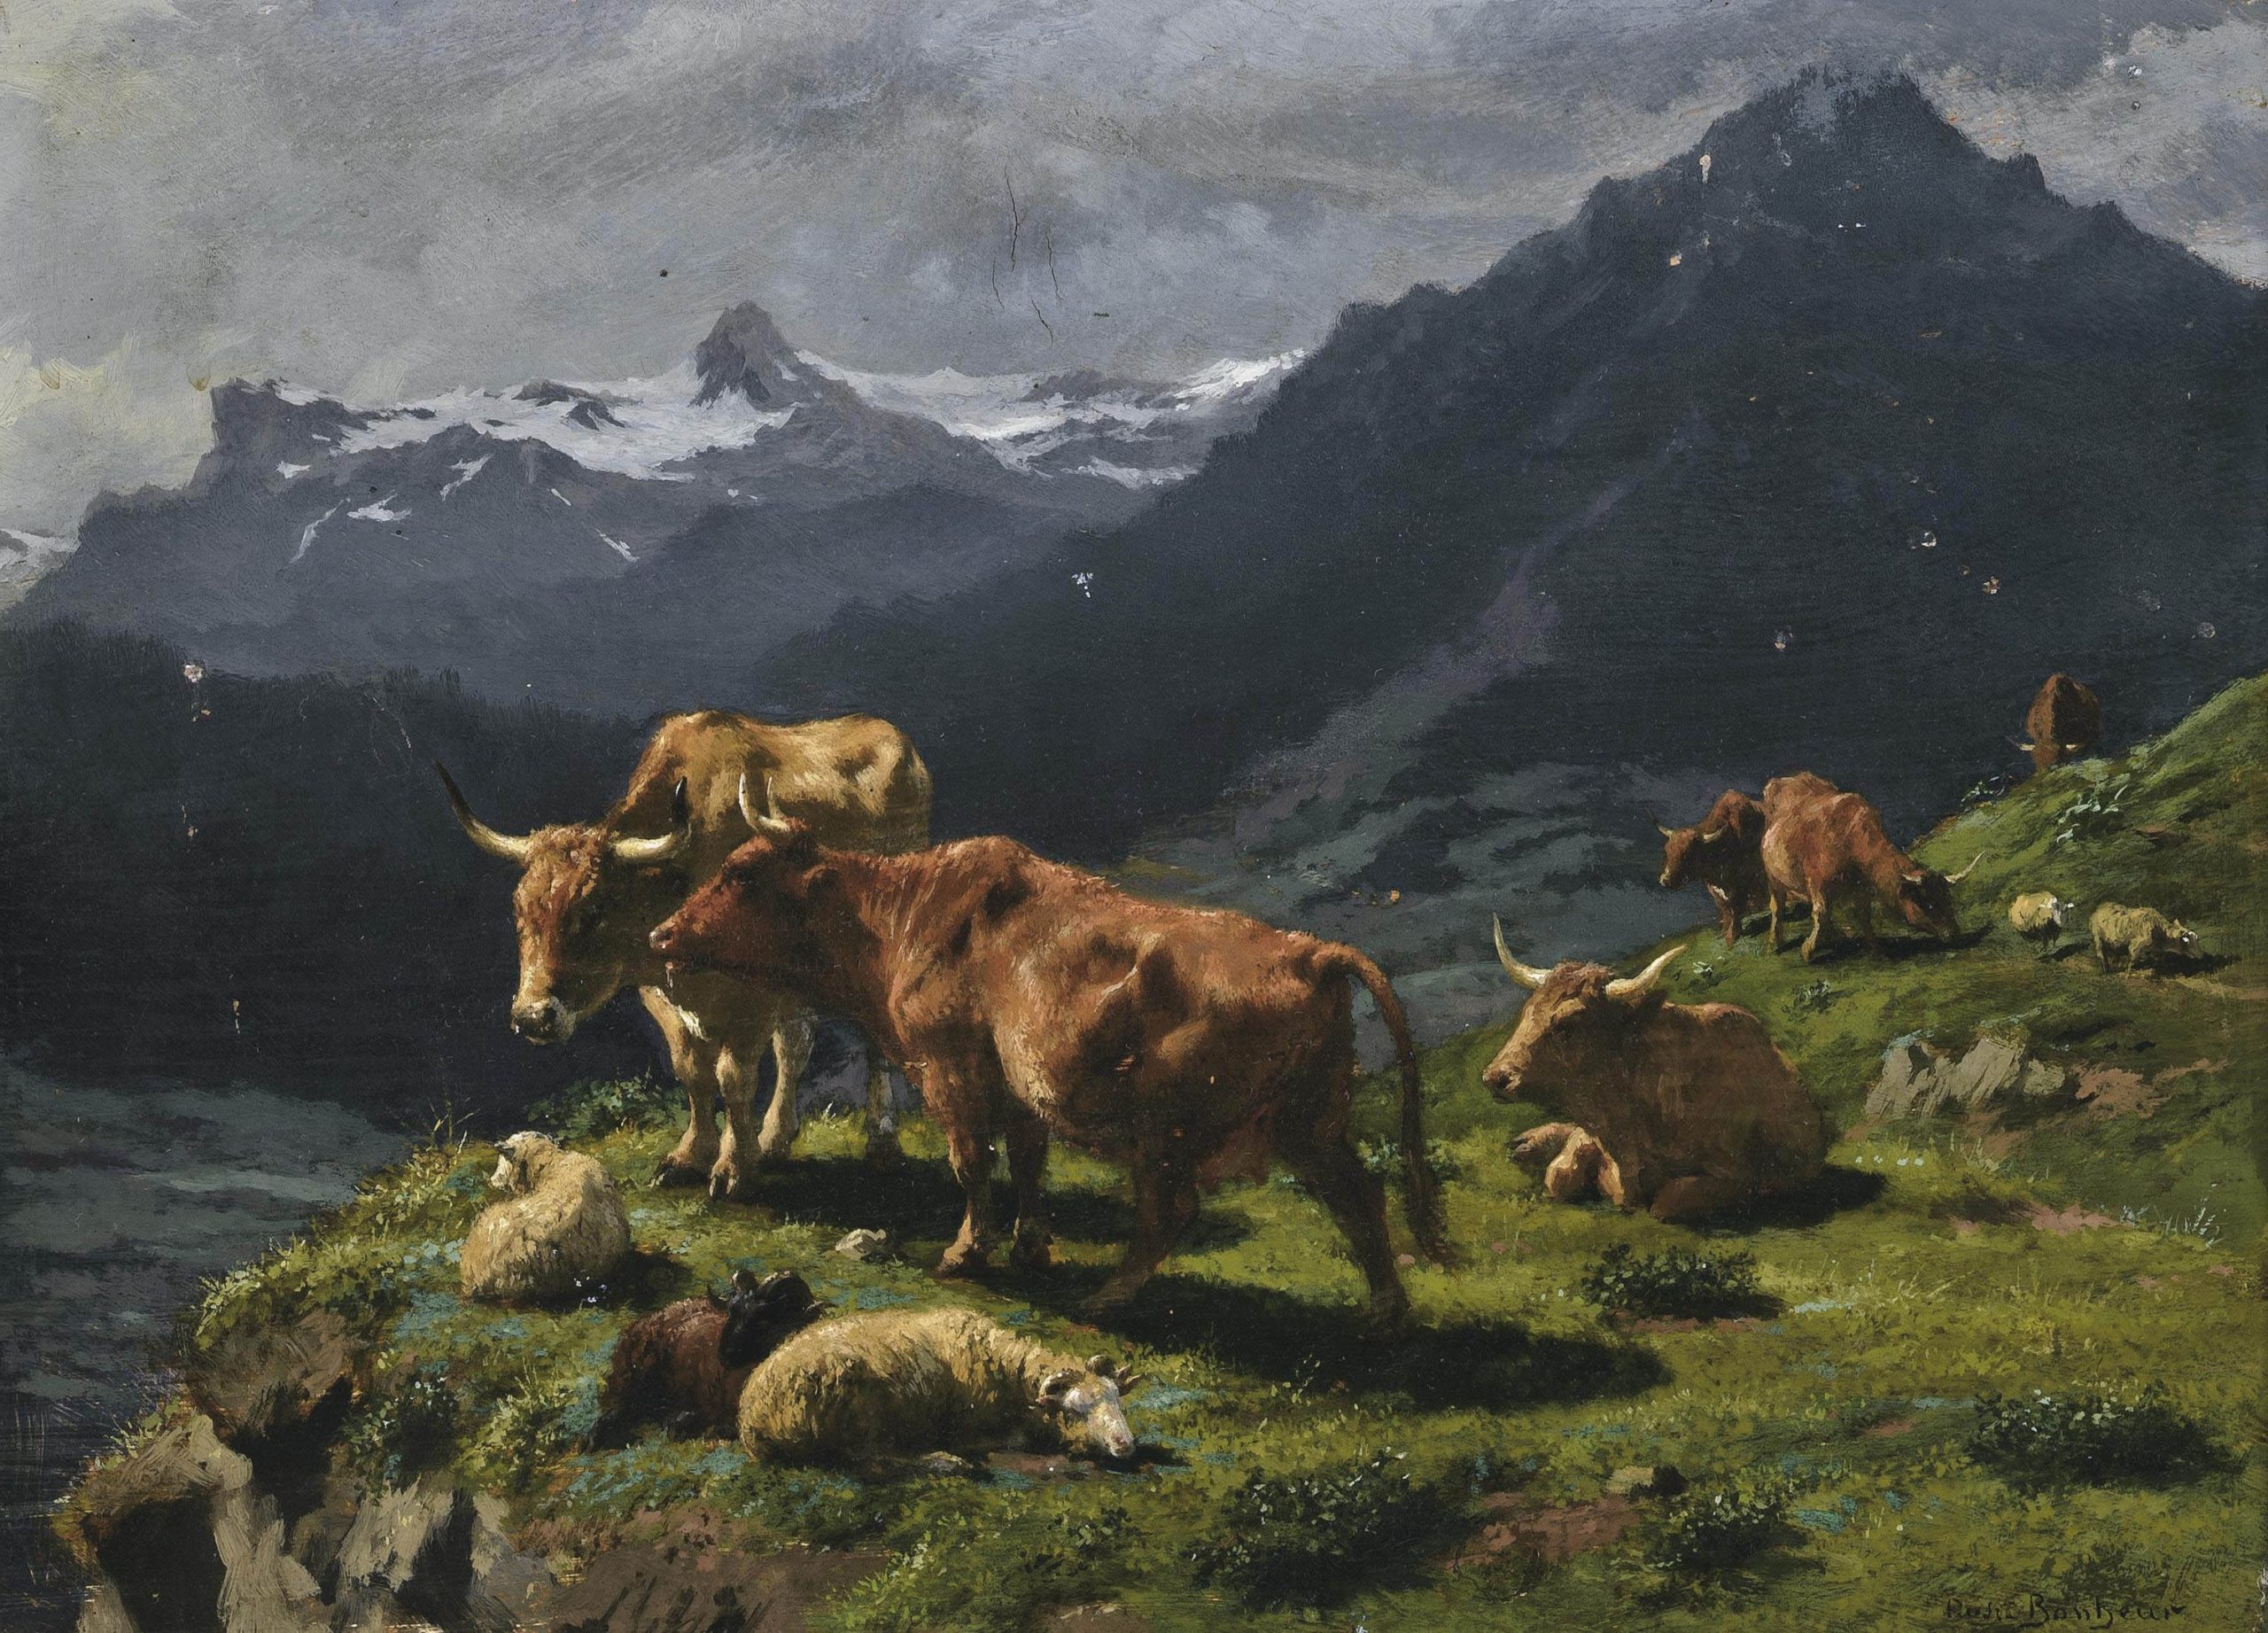 Cattle and sheep on a grassy cliff with mountains in the background